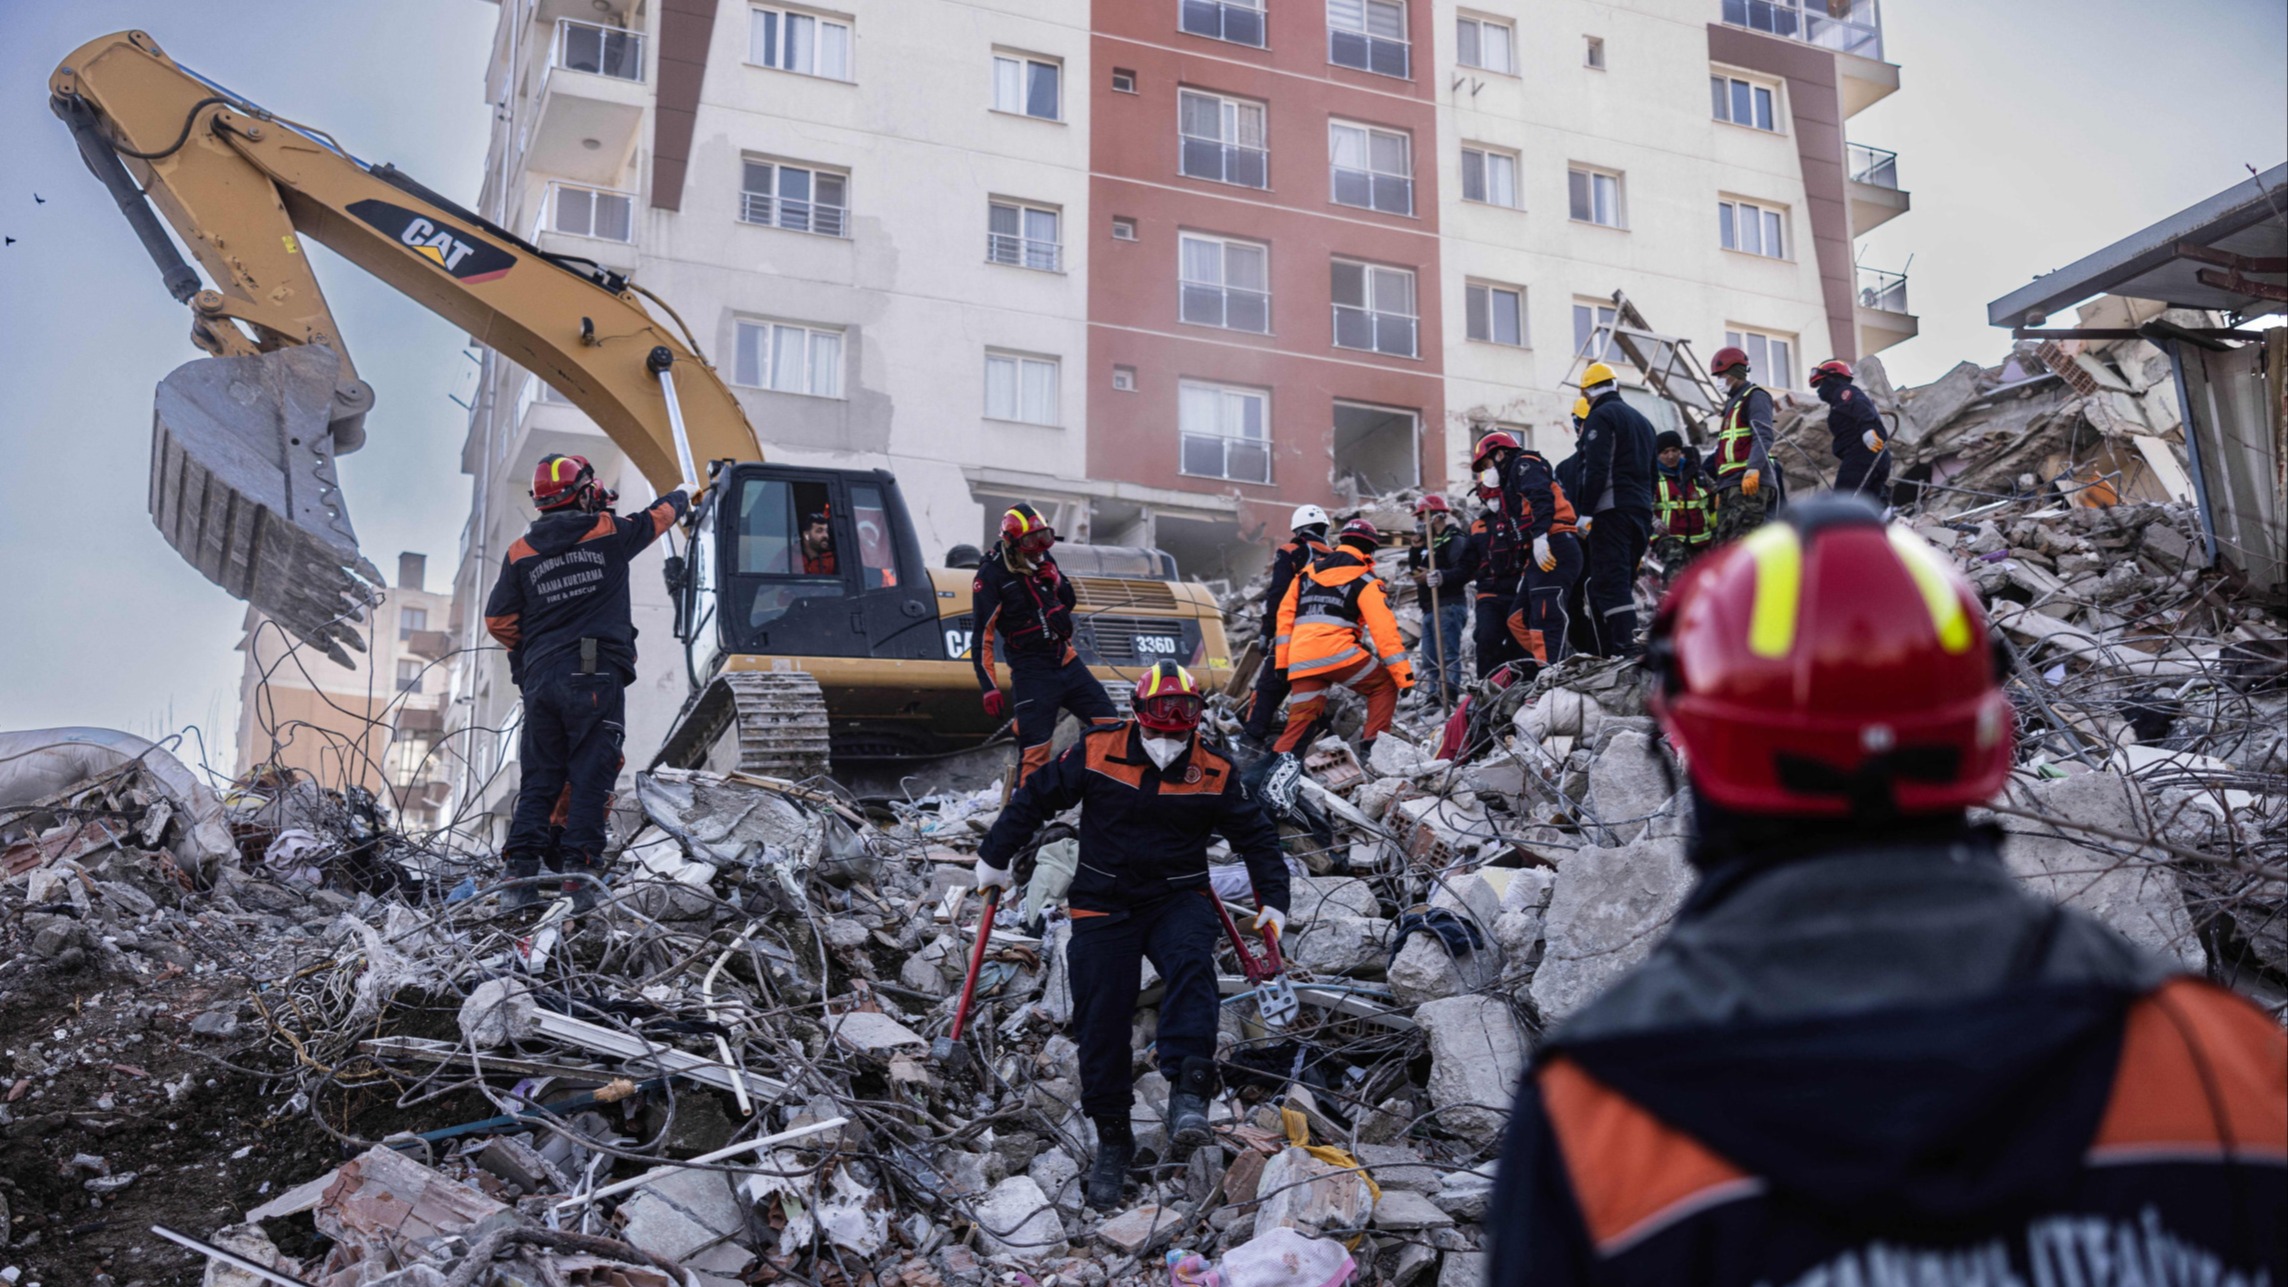 Turkey lifts taxes to help pay for earthquake rebuild | Financial Times